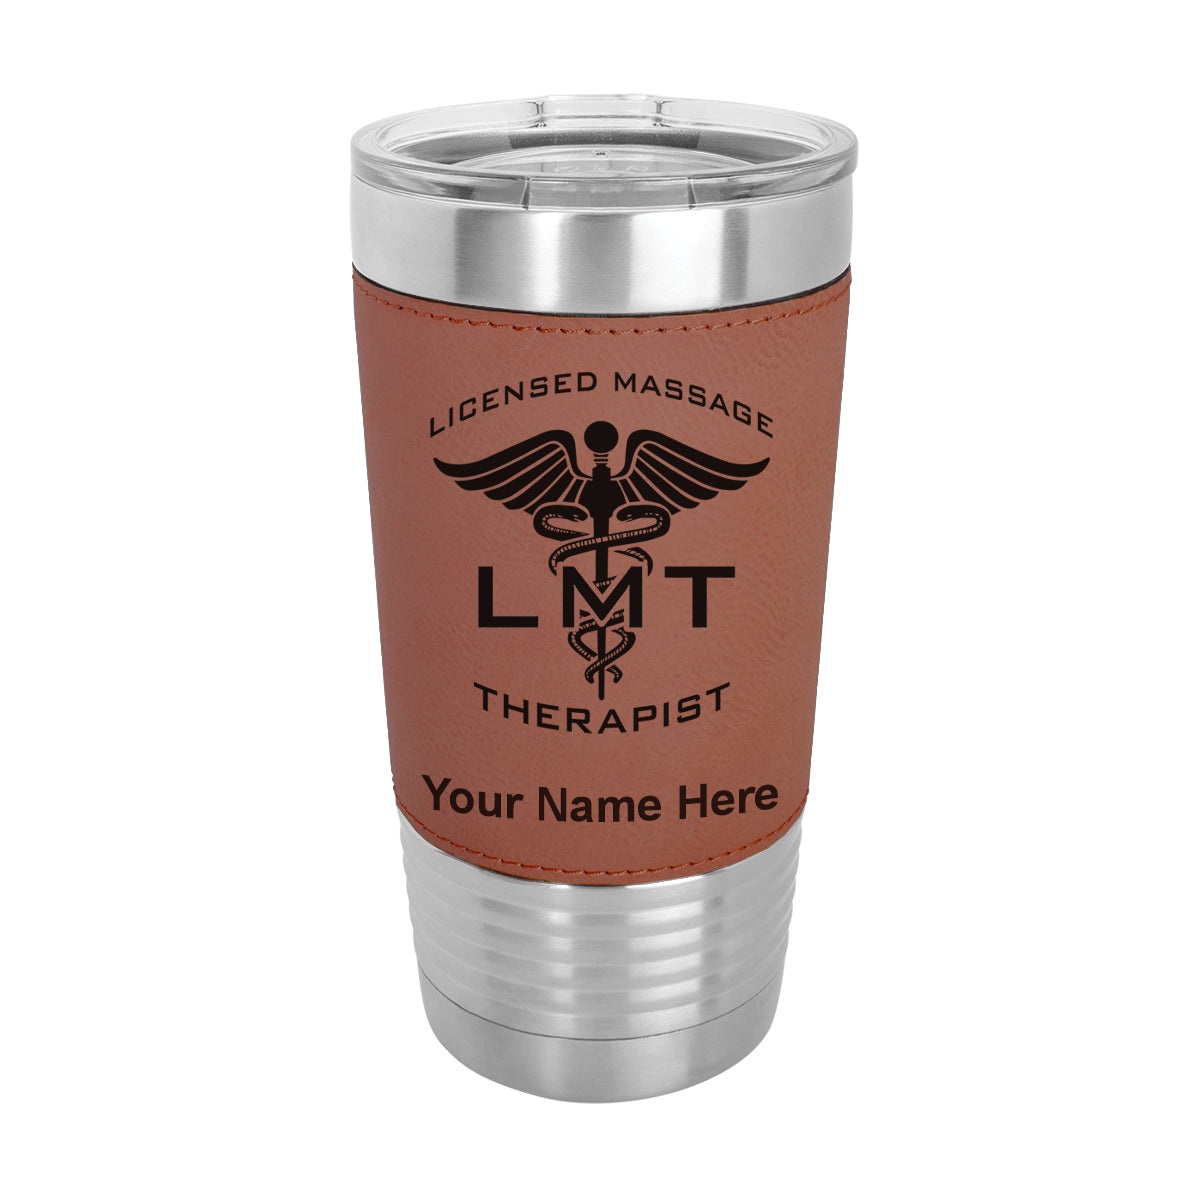 20oz Faux Leather Tumbler Mug, LMT Licensed Massage Therapist, Personalized Engraving Included - LaserGram Custom Engraved Gifts